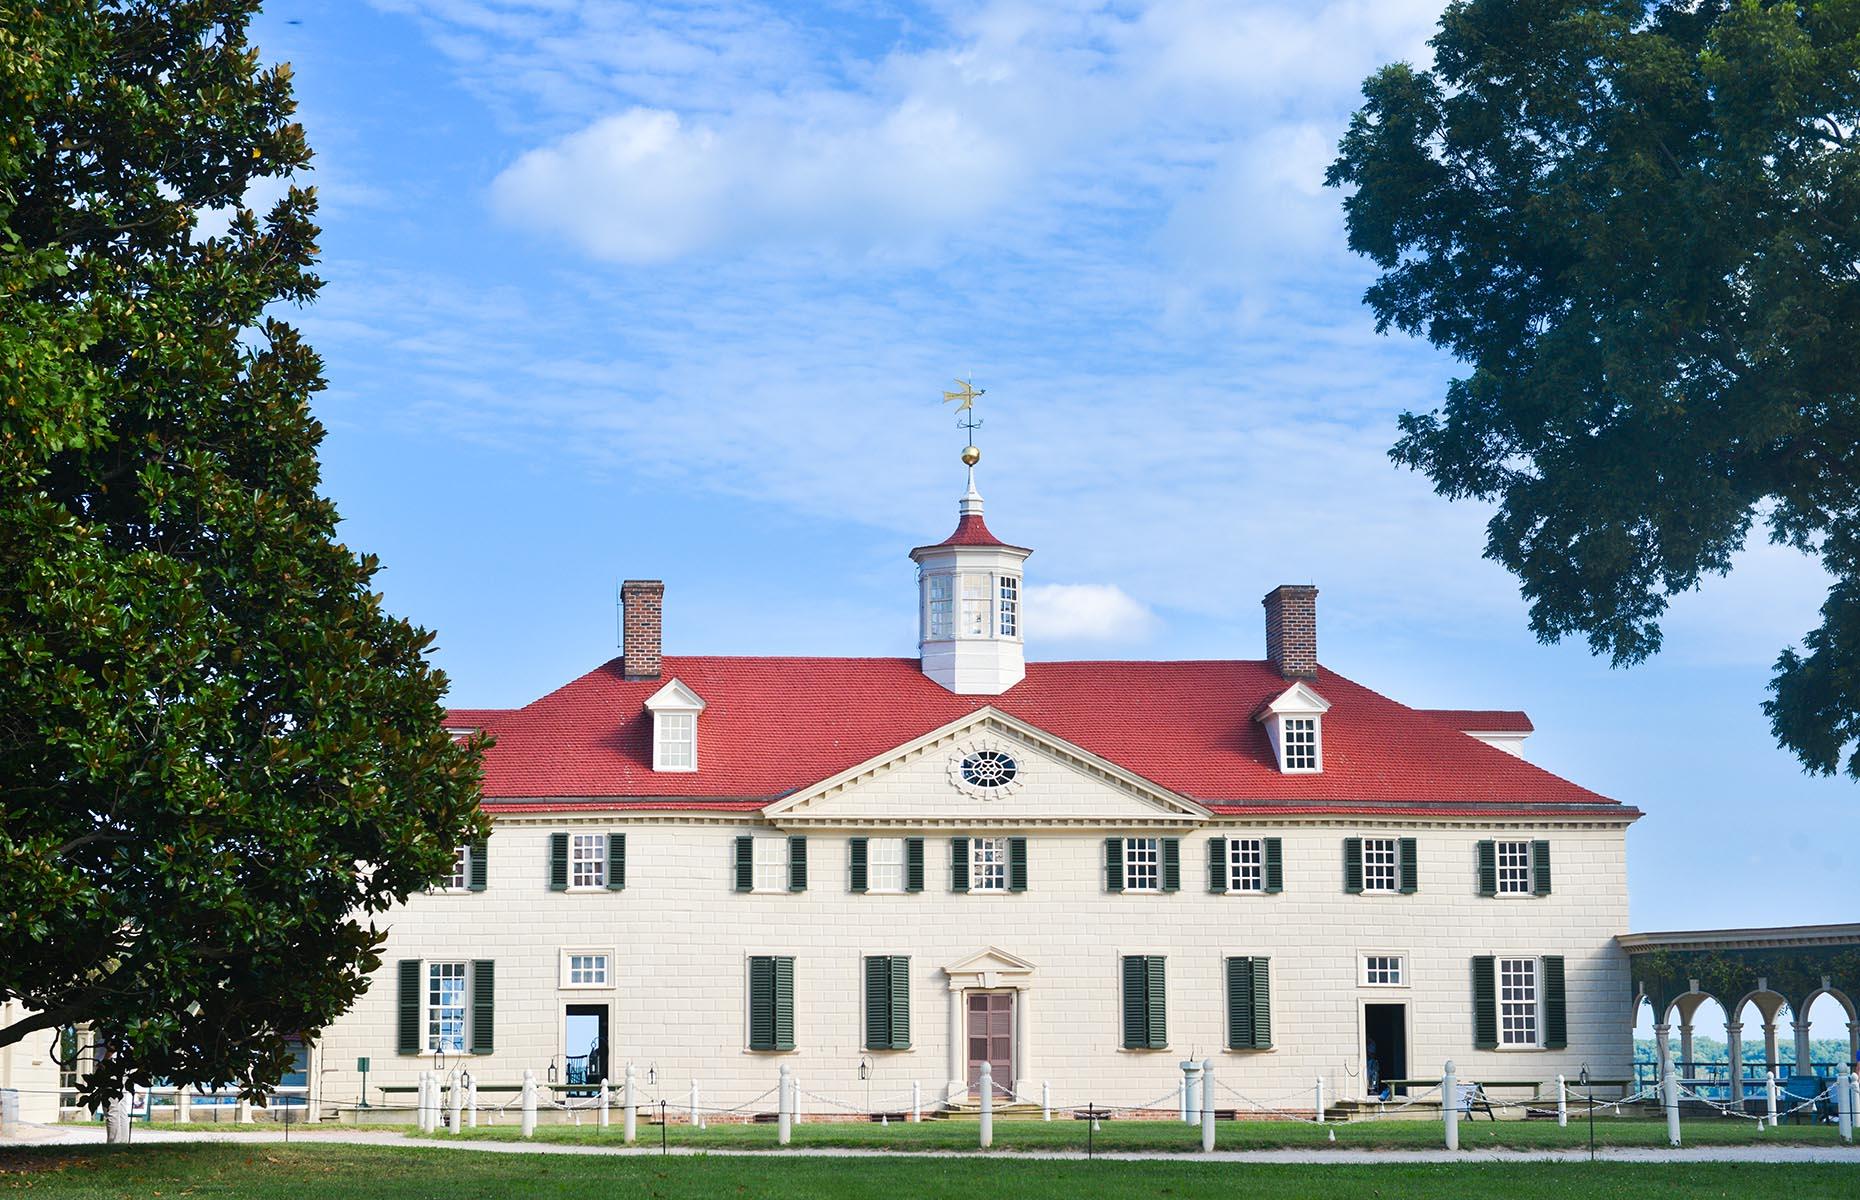 <p>Mount Vernon is the historic plantation home of America's First President George Washington. Today, more than 200 years after Washington's death, the estate pulls in visitors with its large grounds, absorbing museum exhibits and the white-and-red mansion, dating to the 1700s. Museum displays, like <a href="https://www.mountvernon.org/plan-your-visit/calendar/exhibitions/lives-bound-together-slavery-at-george-washington-s-mount-vernon/">Lives Bound Together</a>, explore the lives of the enslaved people who once lived and worked on Washington's estate, while tours cover everything from archaeology and farming to 18th-century America and George Washington himself.</p>